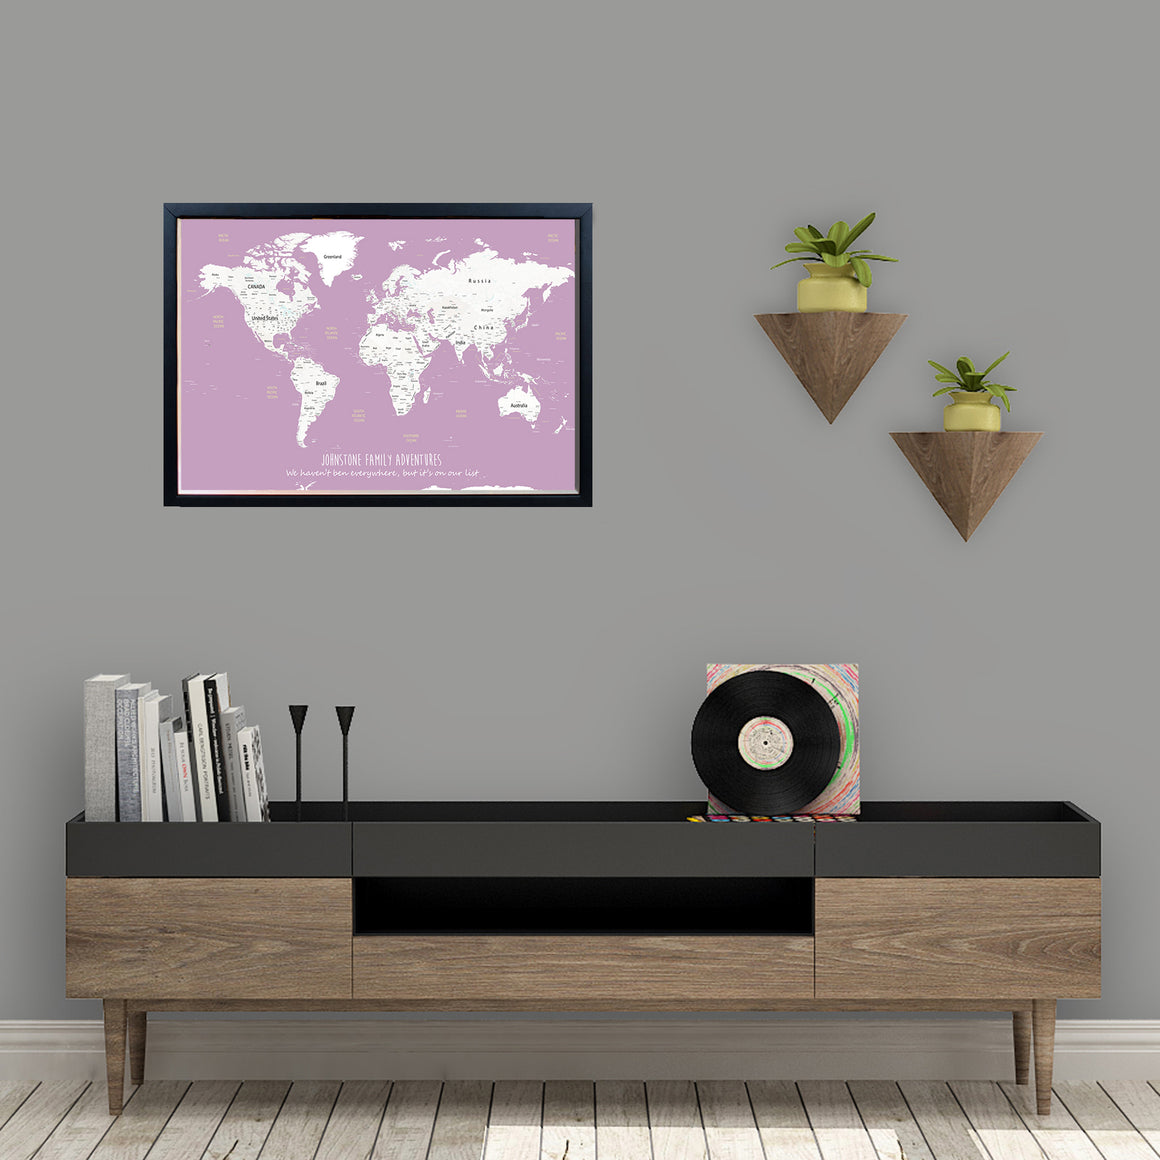 Personalised Map, World Map Pin Board, Framed World Map, Custom Travel Map, World Map Wall Art, Framed Pin Board, Travel Map Pin Board, Wedding Gift map, Couples Gift, World Map Art, World Travel Map, Push Pin Travel Map, Framed Push Pin Map